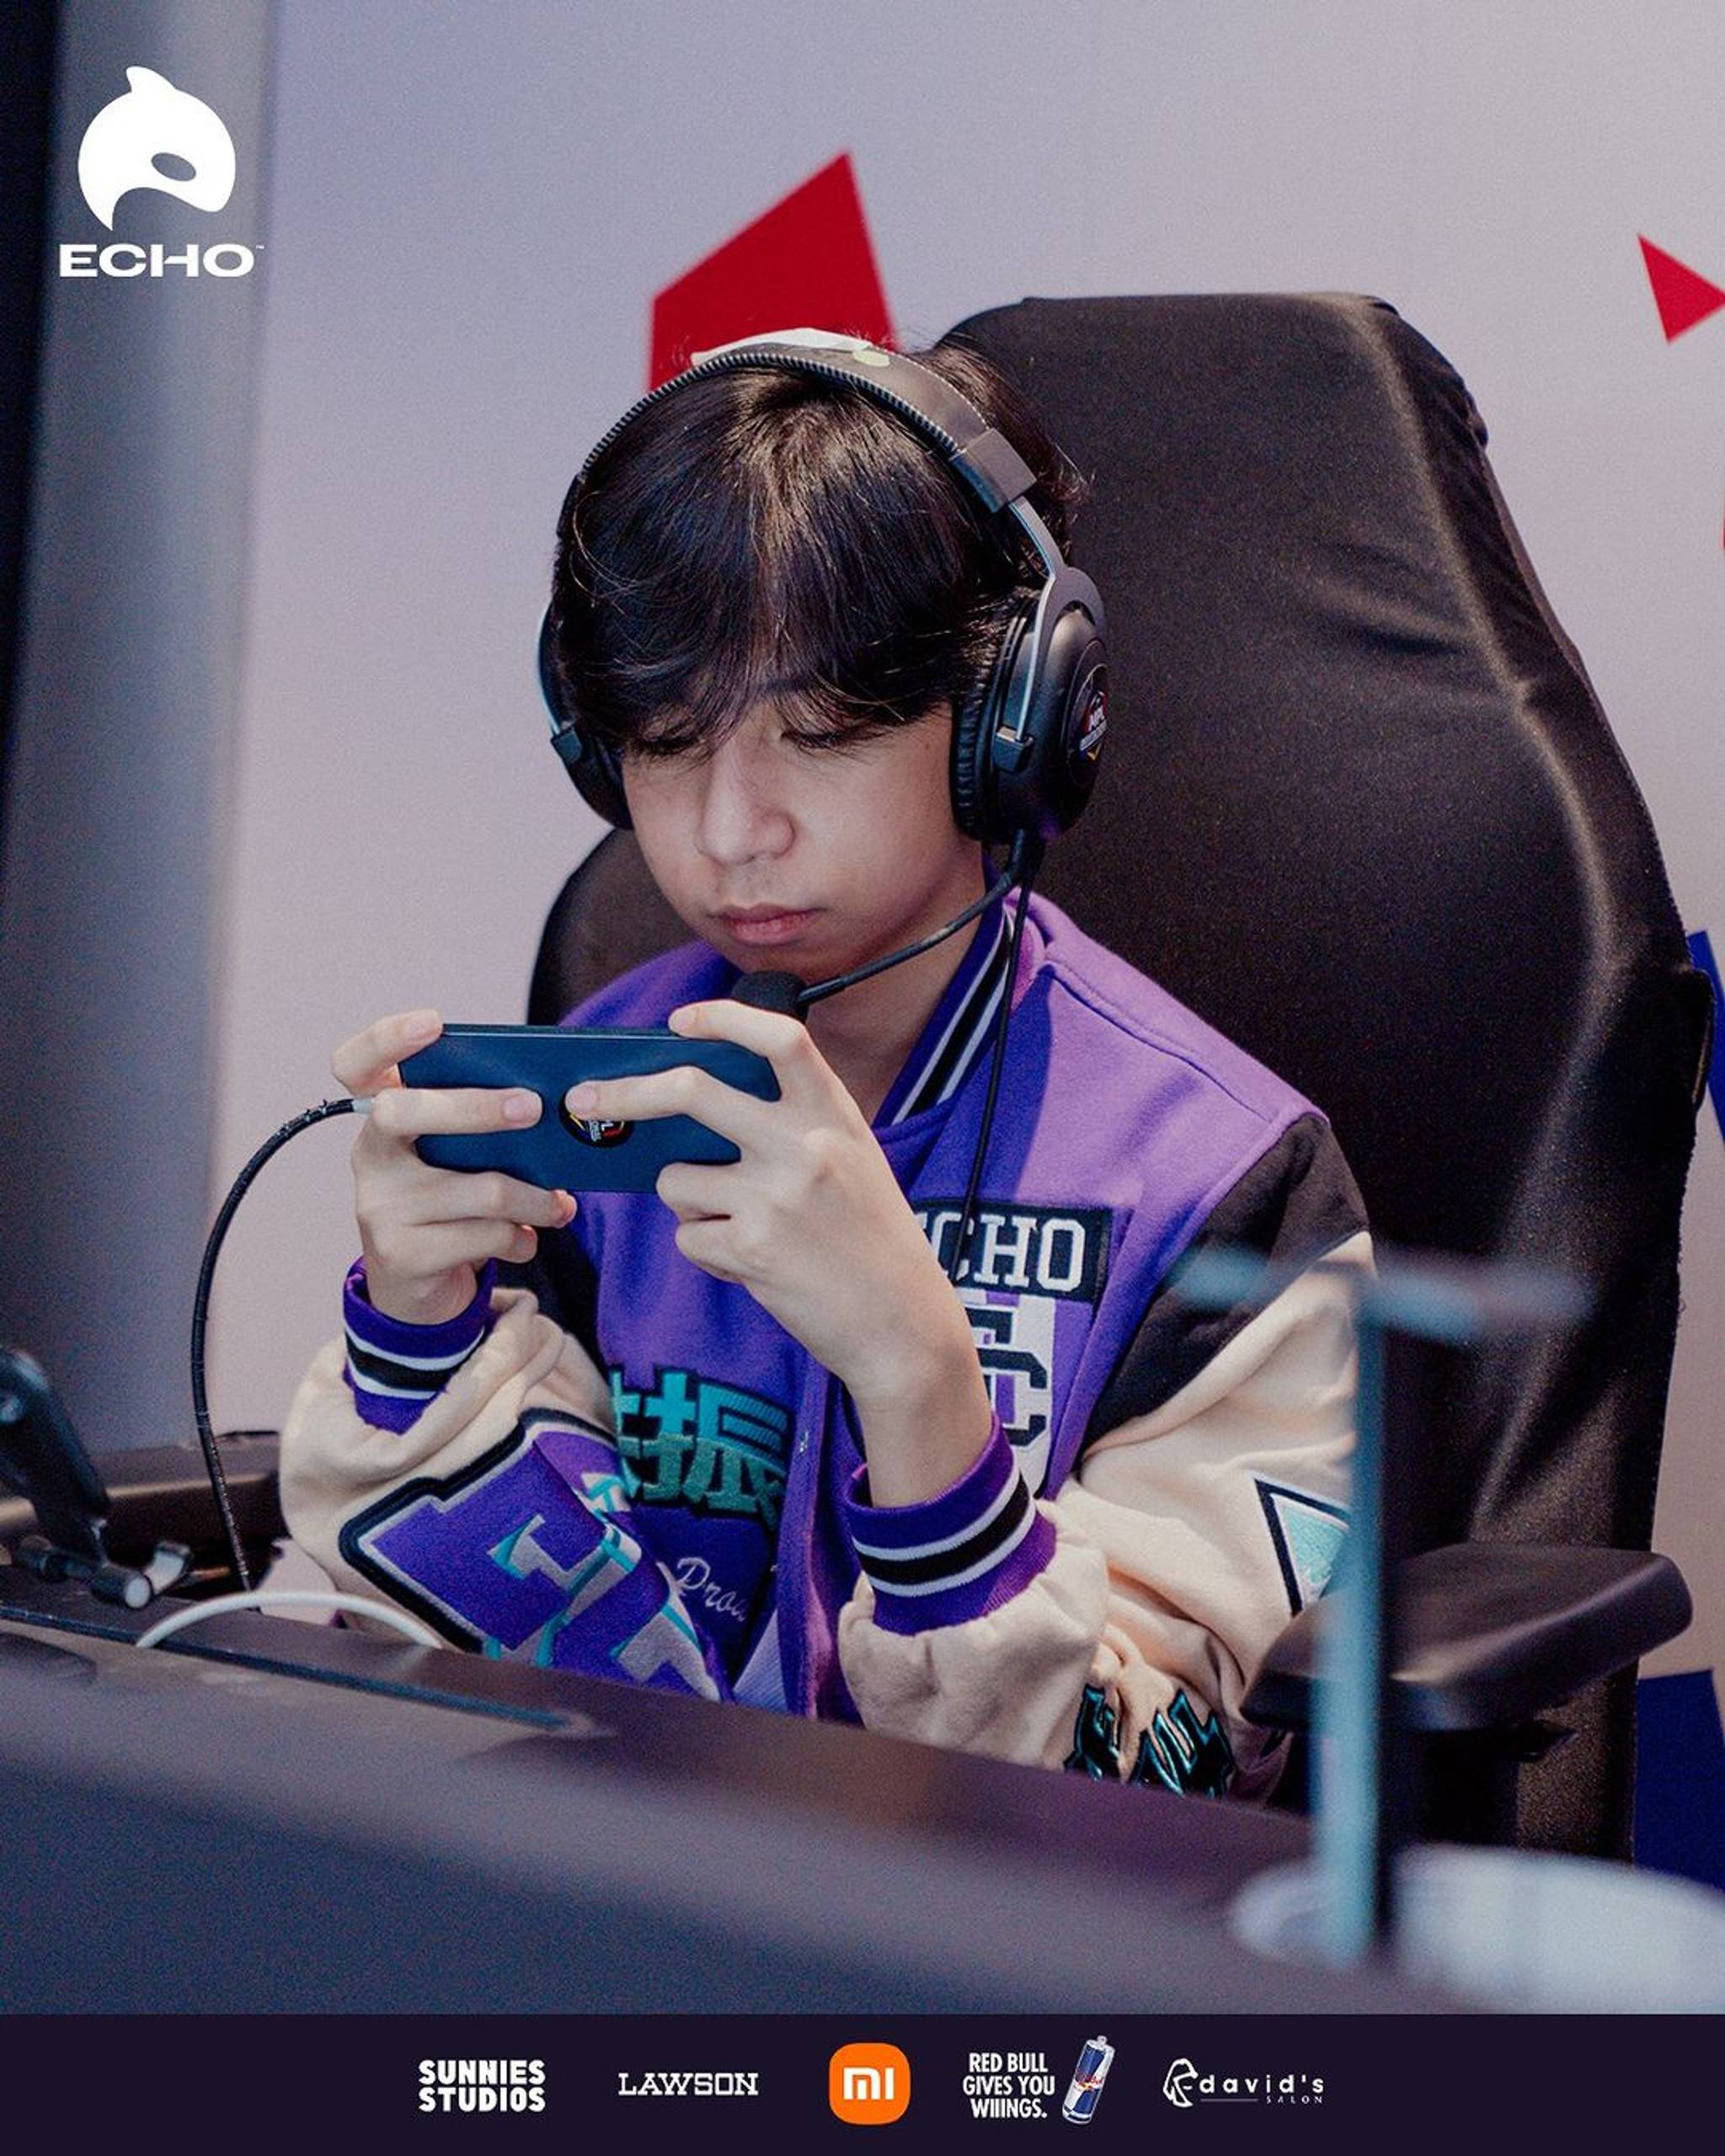 Mobile games inspire a crop of new Philippine esports athletes